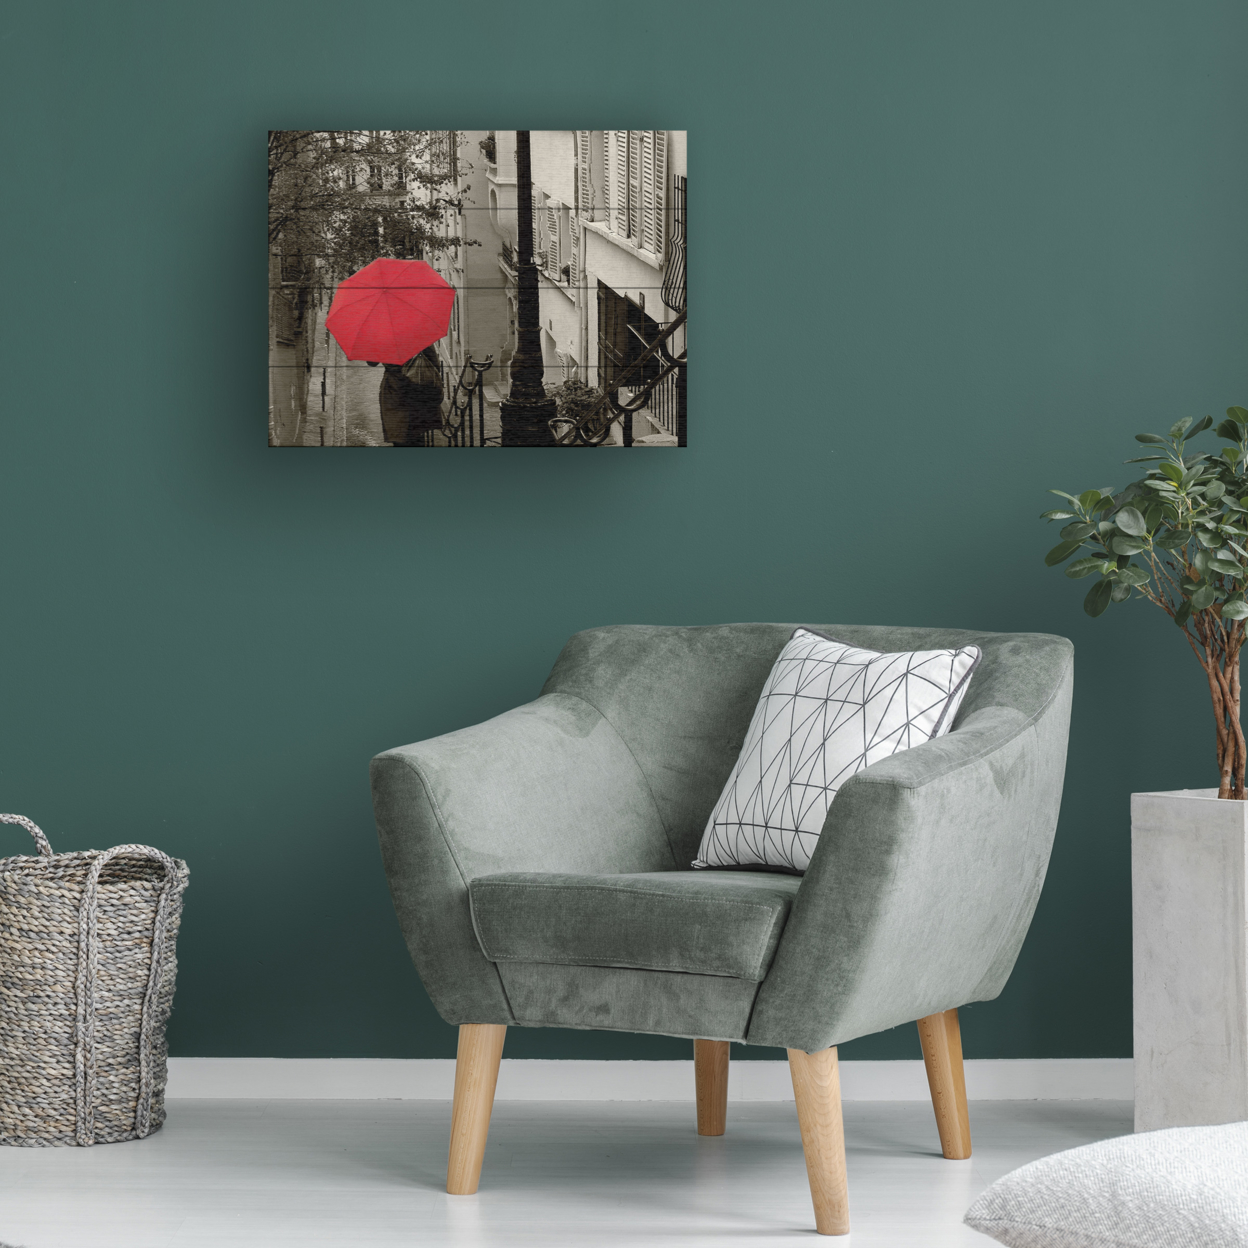 Wall Art 12 X 16 Inches Titled Paris Stroll II Ready To Hang Printed On Wooden Planks